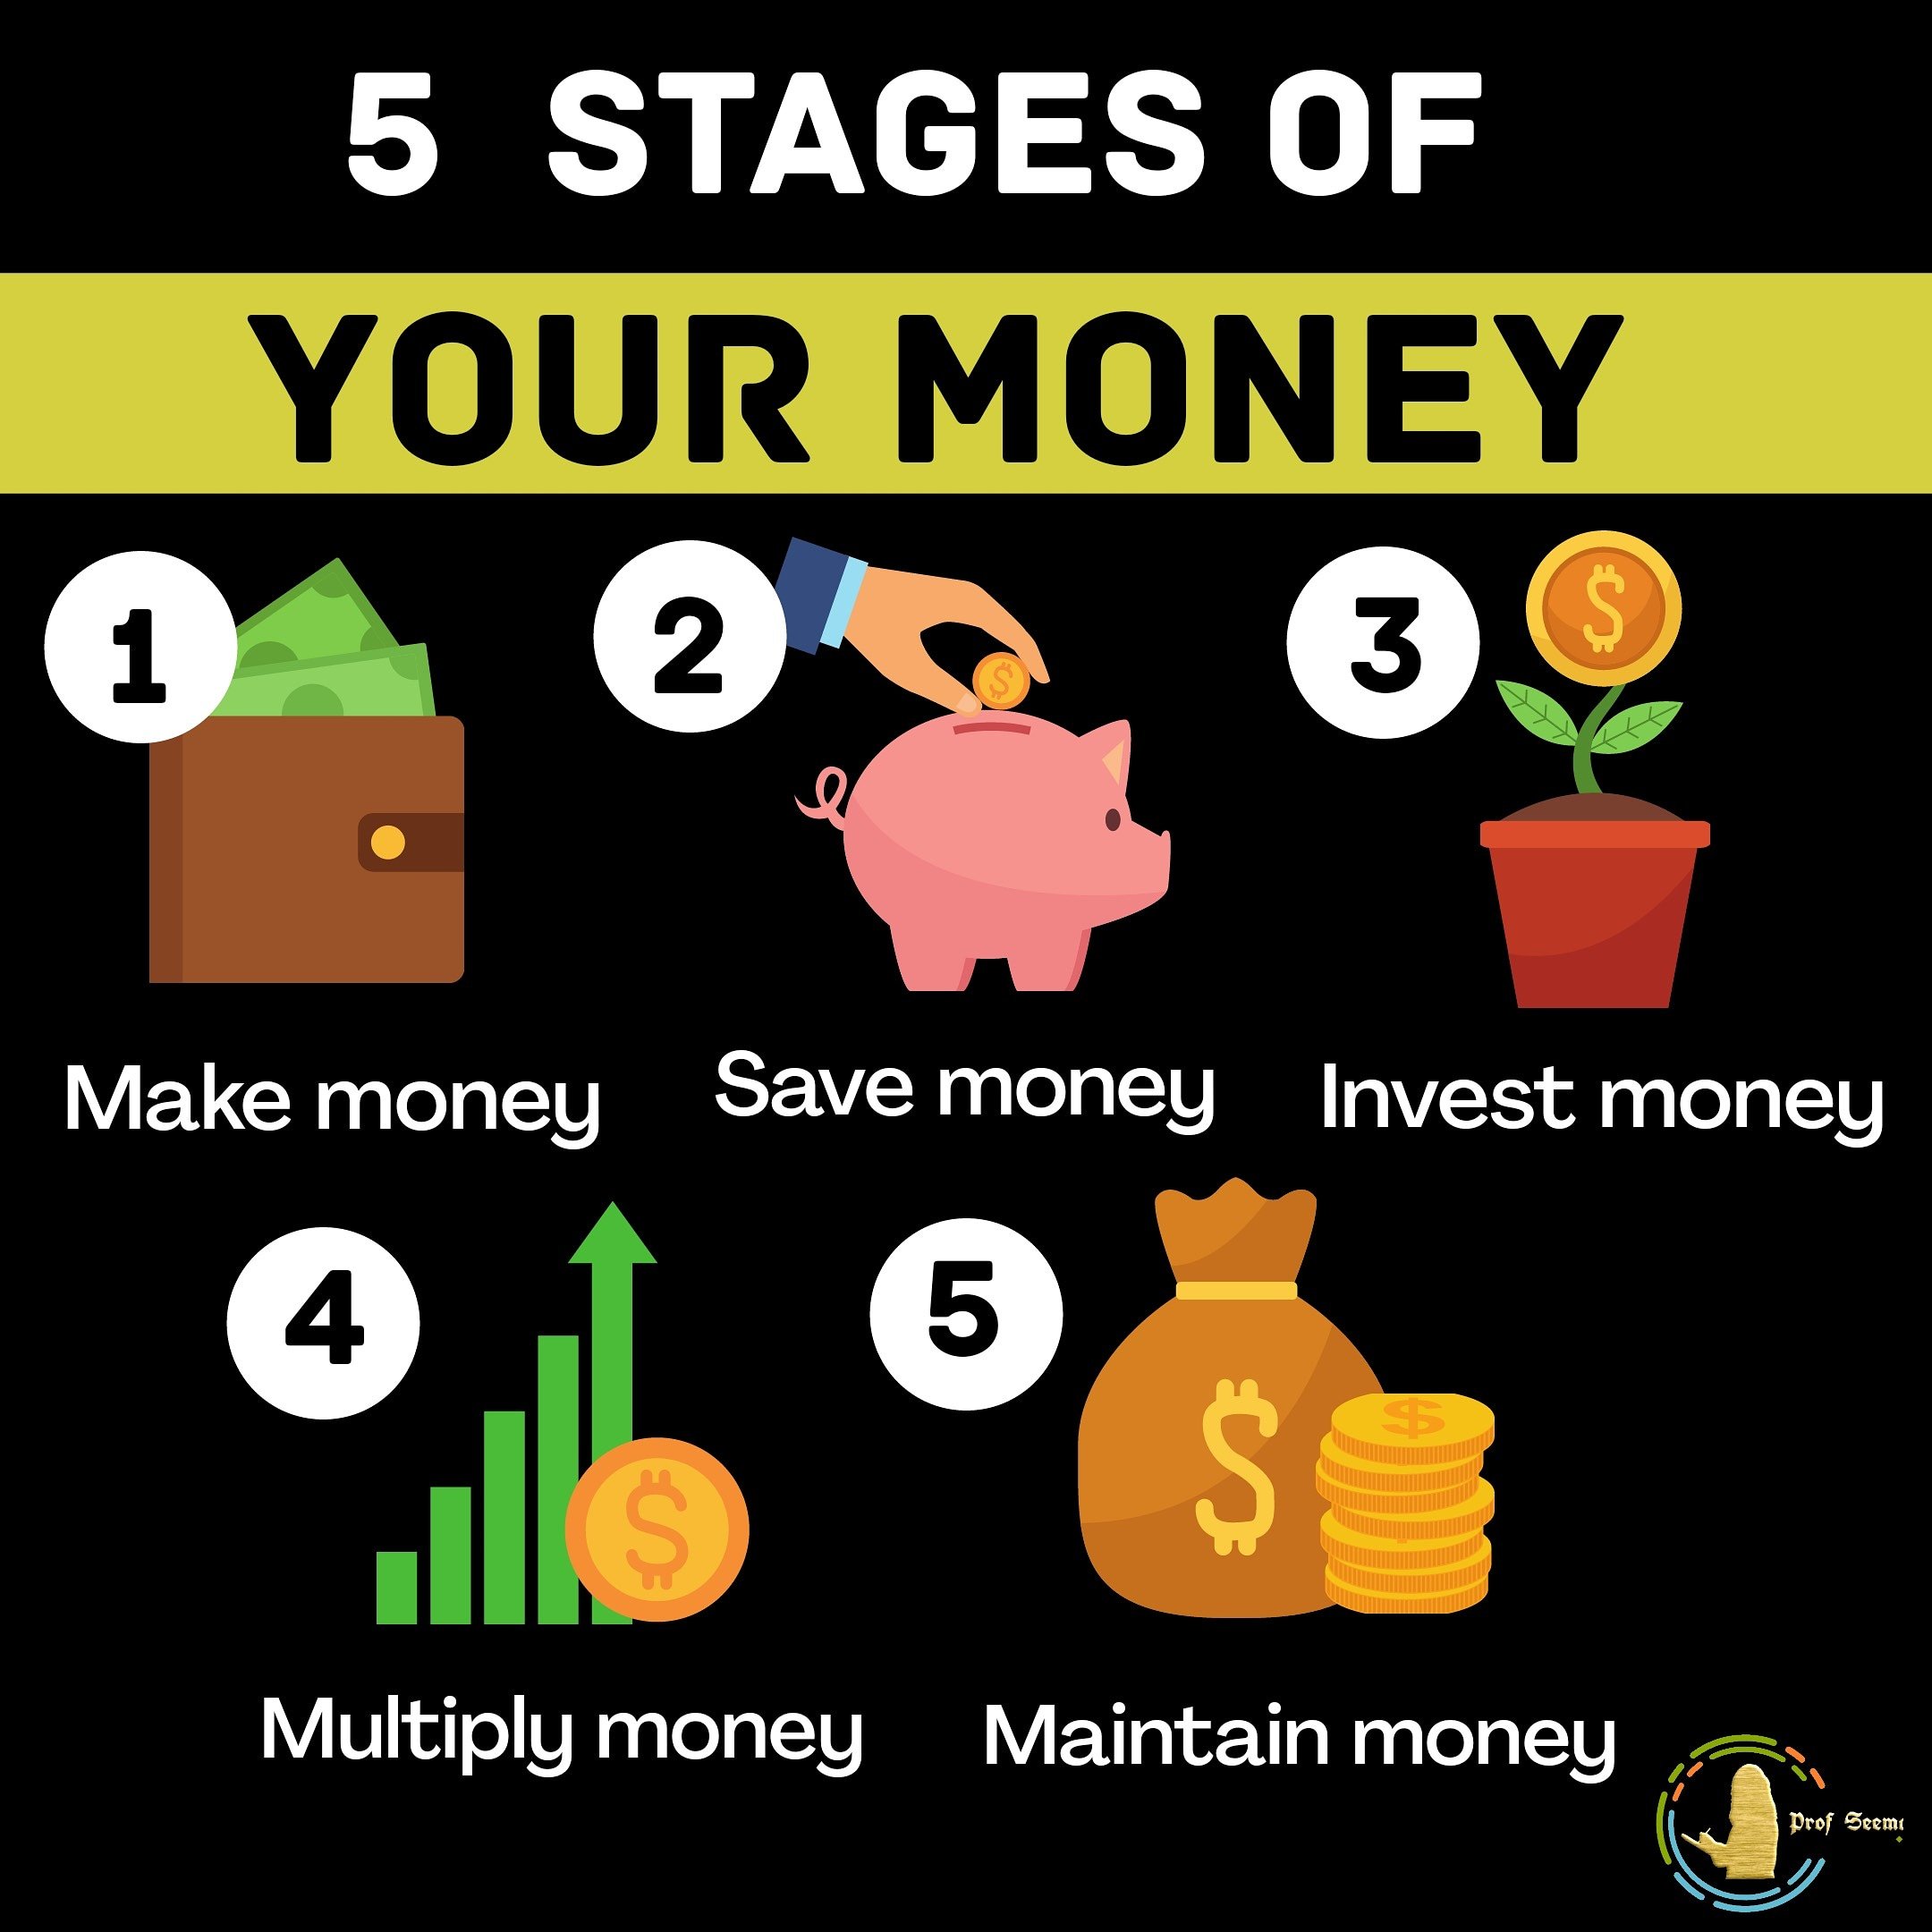 How to Maintain Your Money